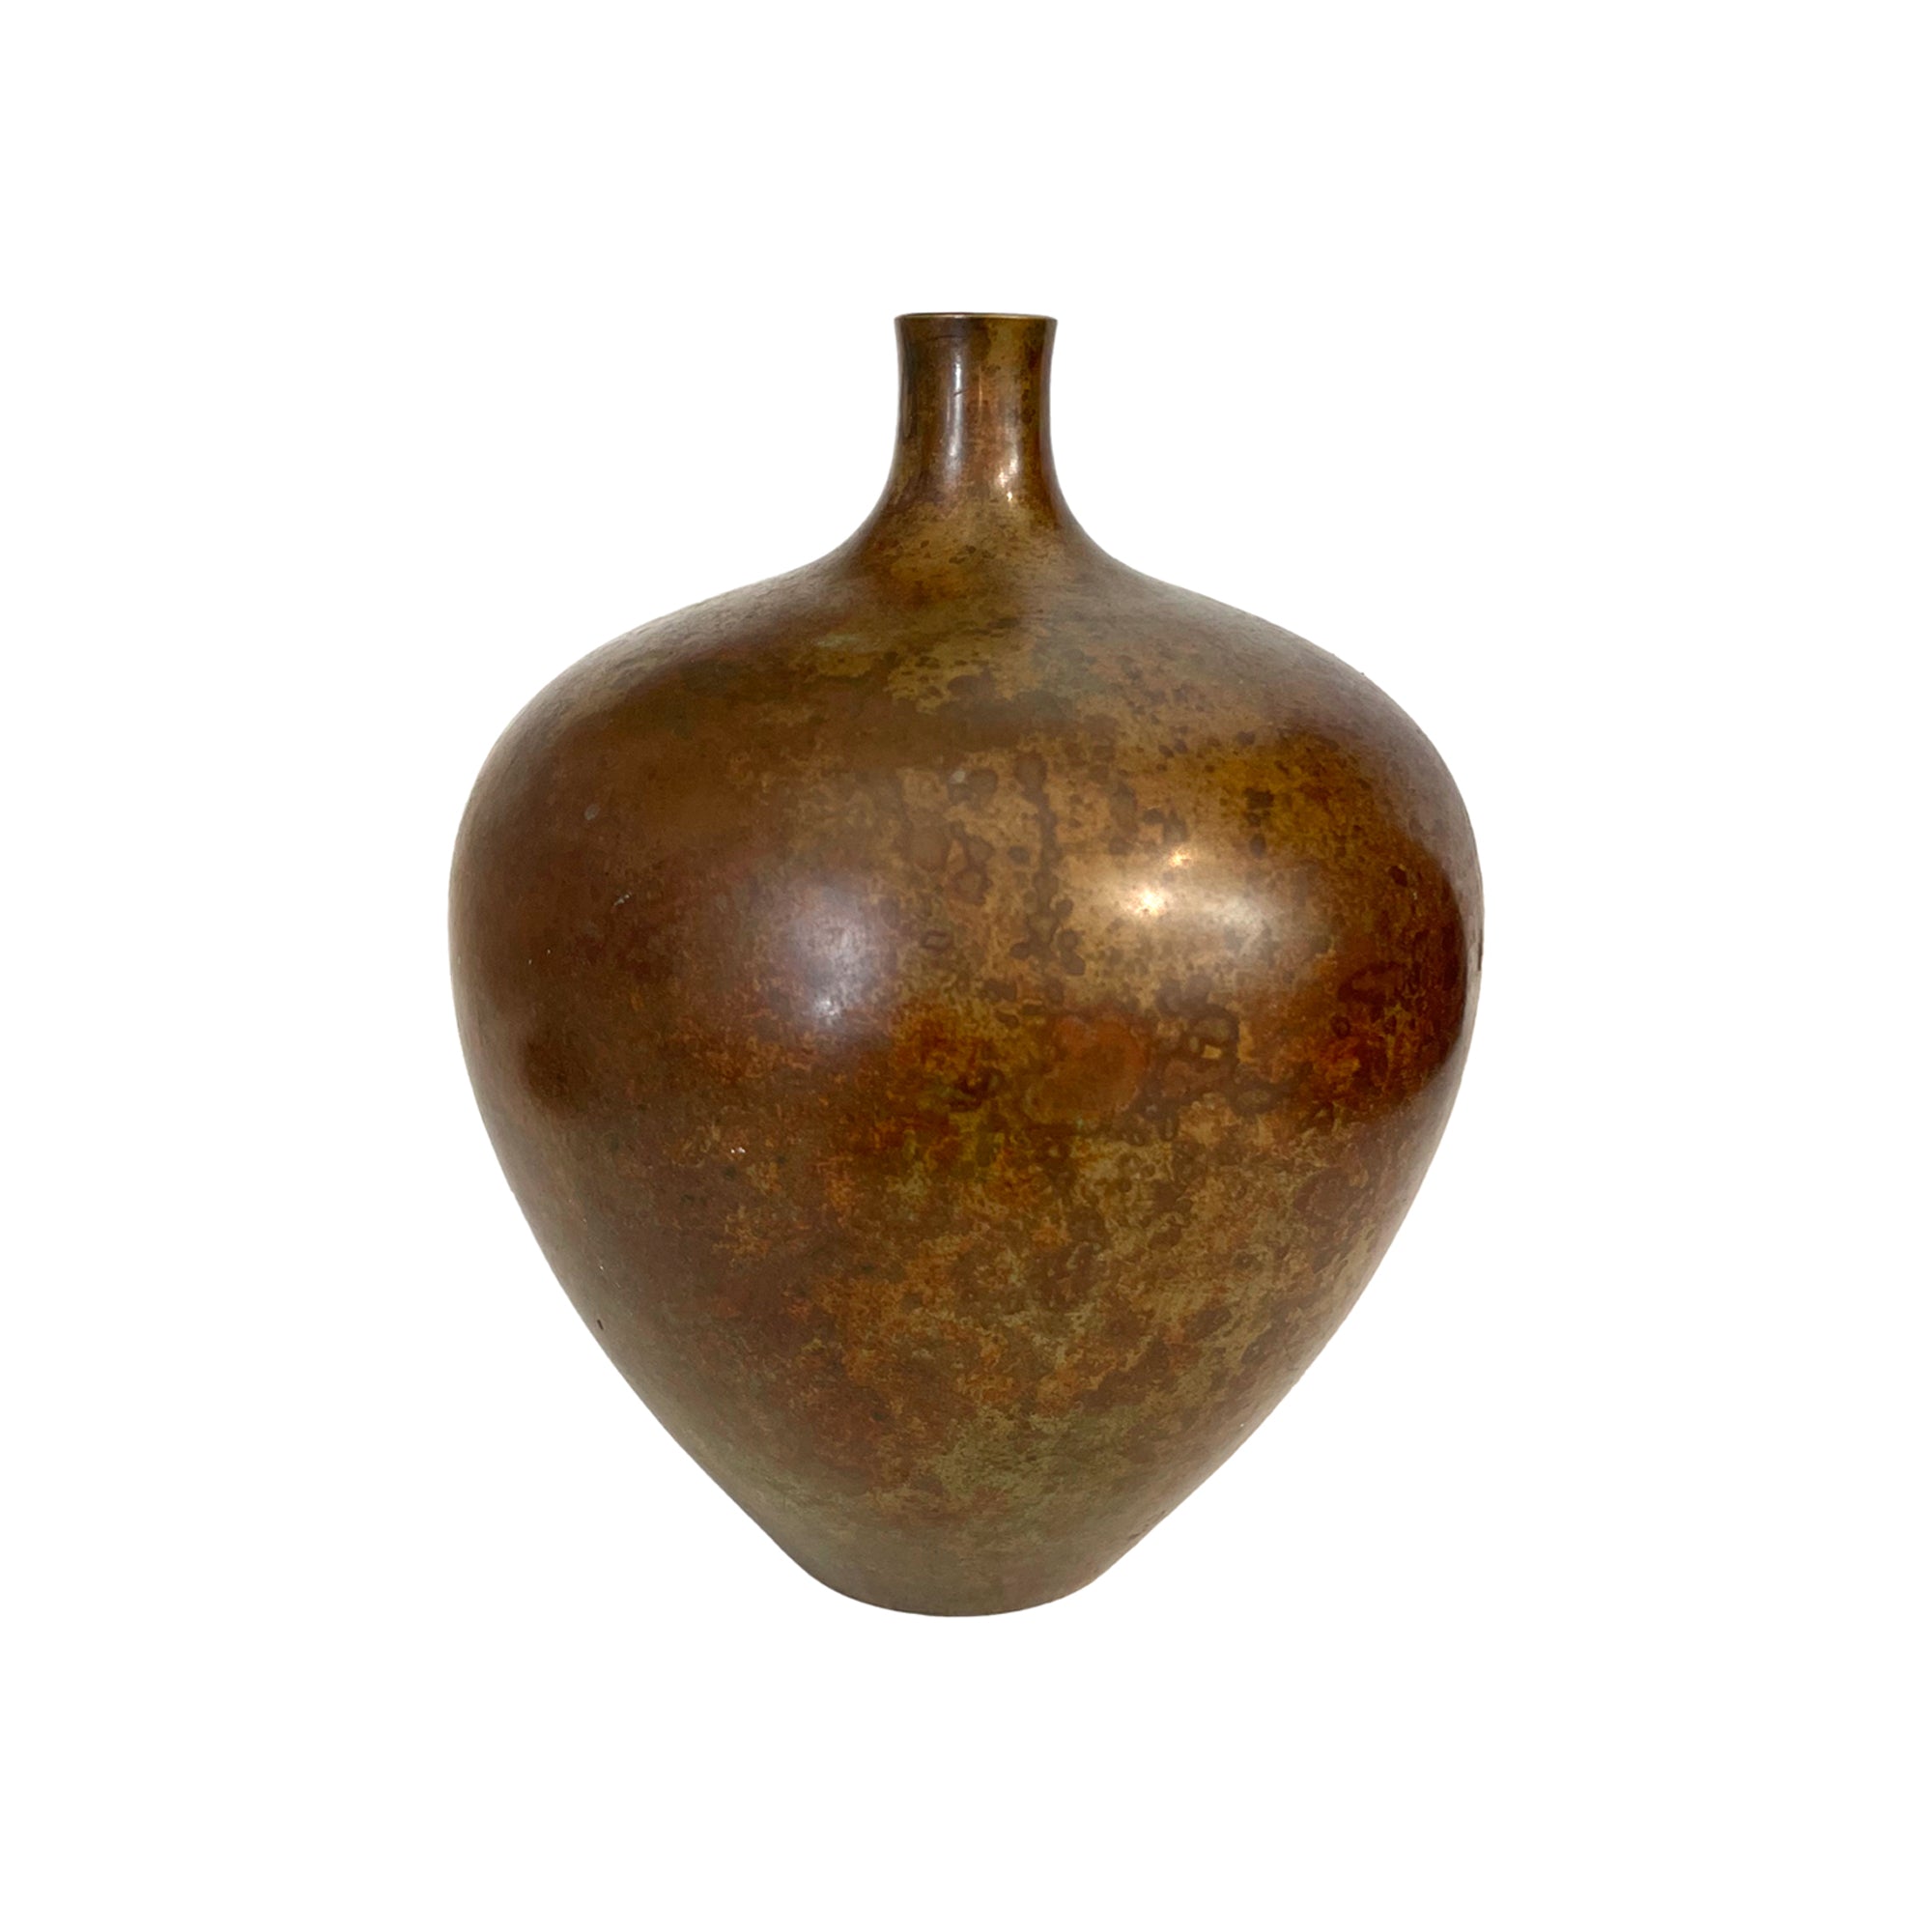 Japanese Bulbous Bronze Vase with Applied Patina